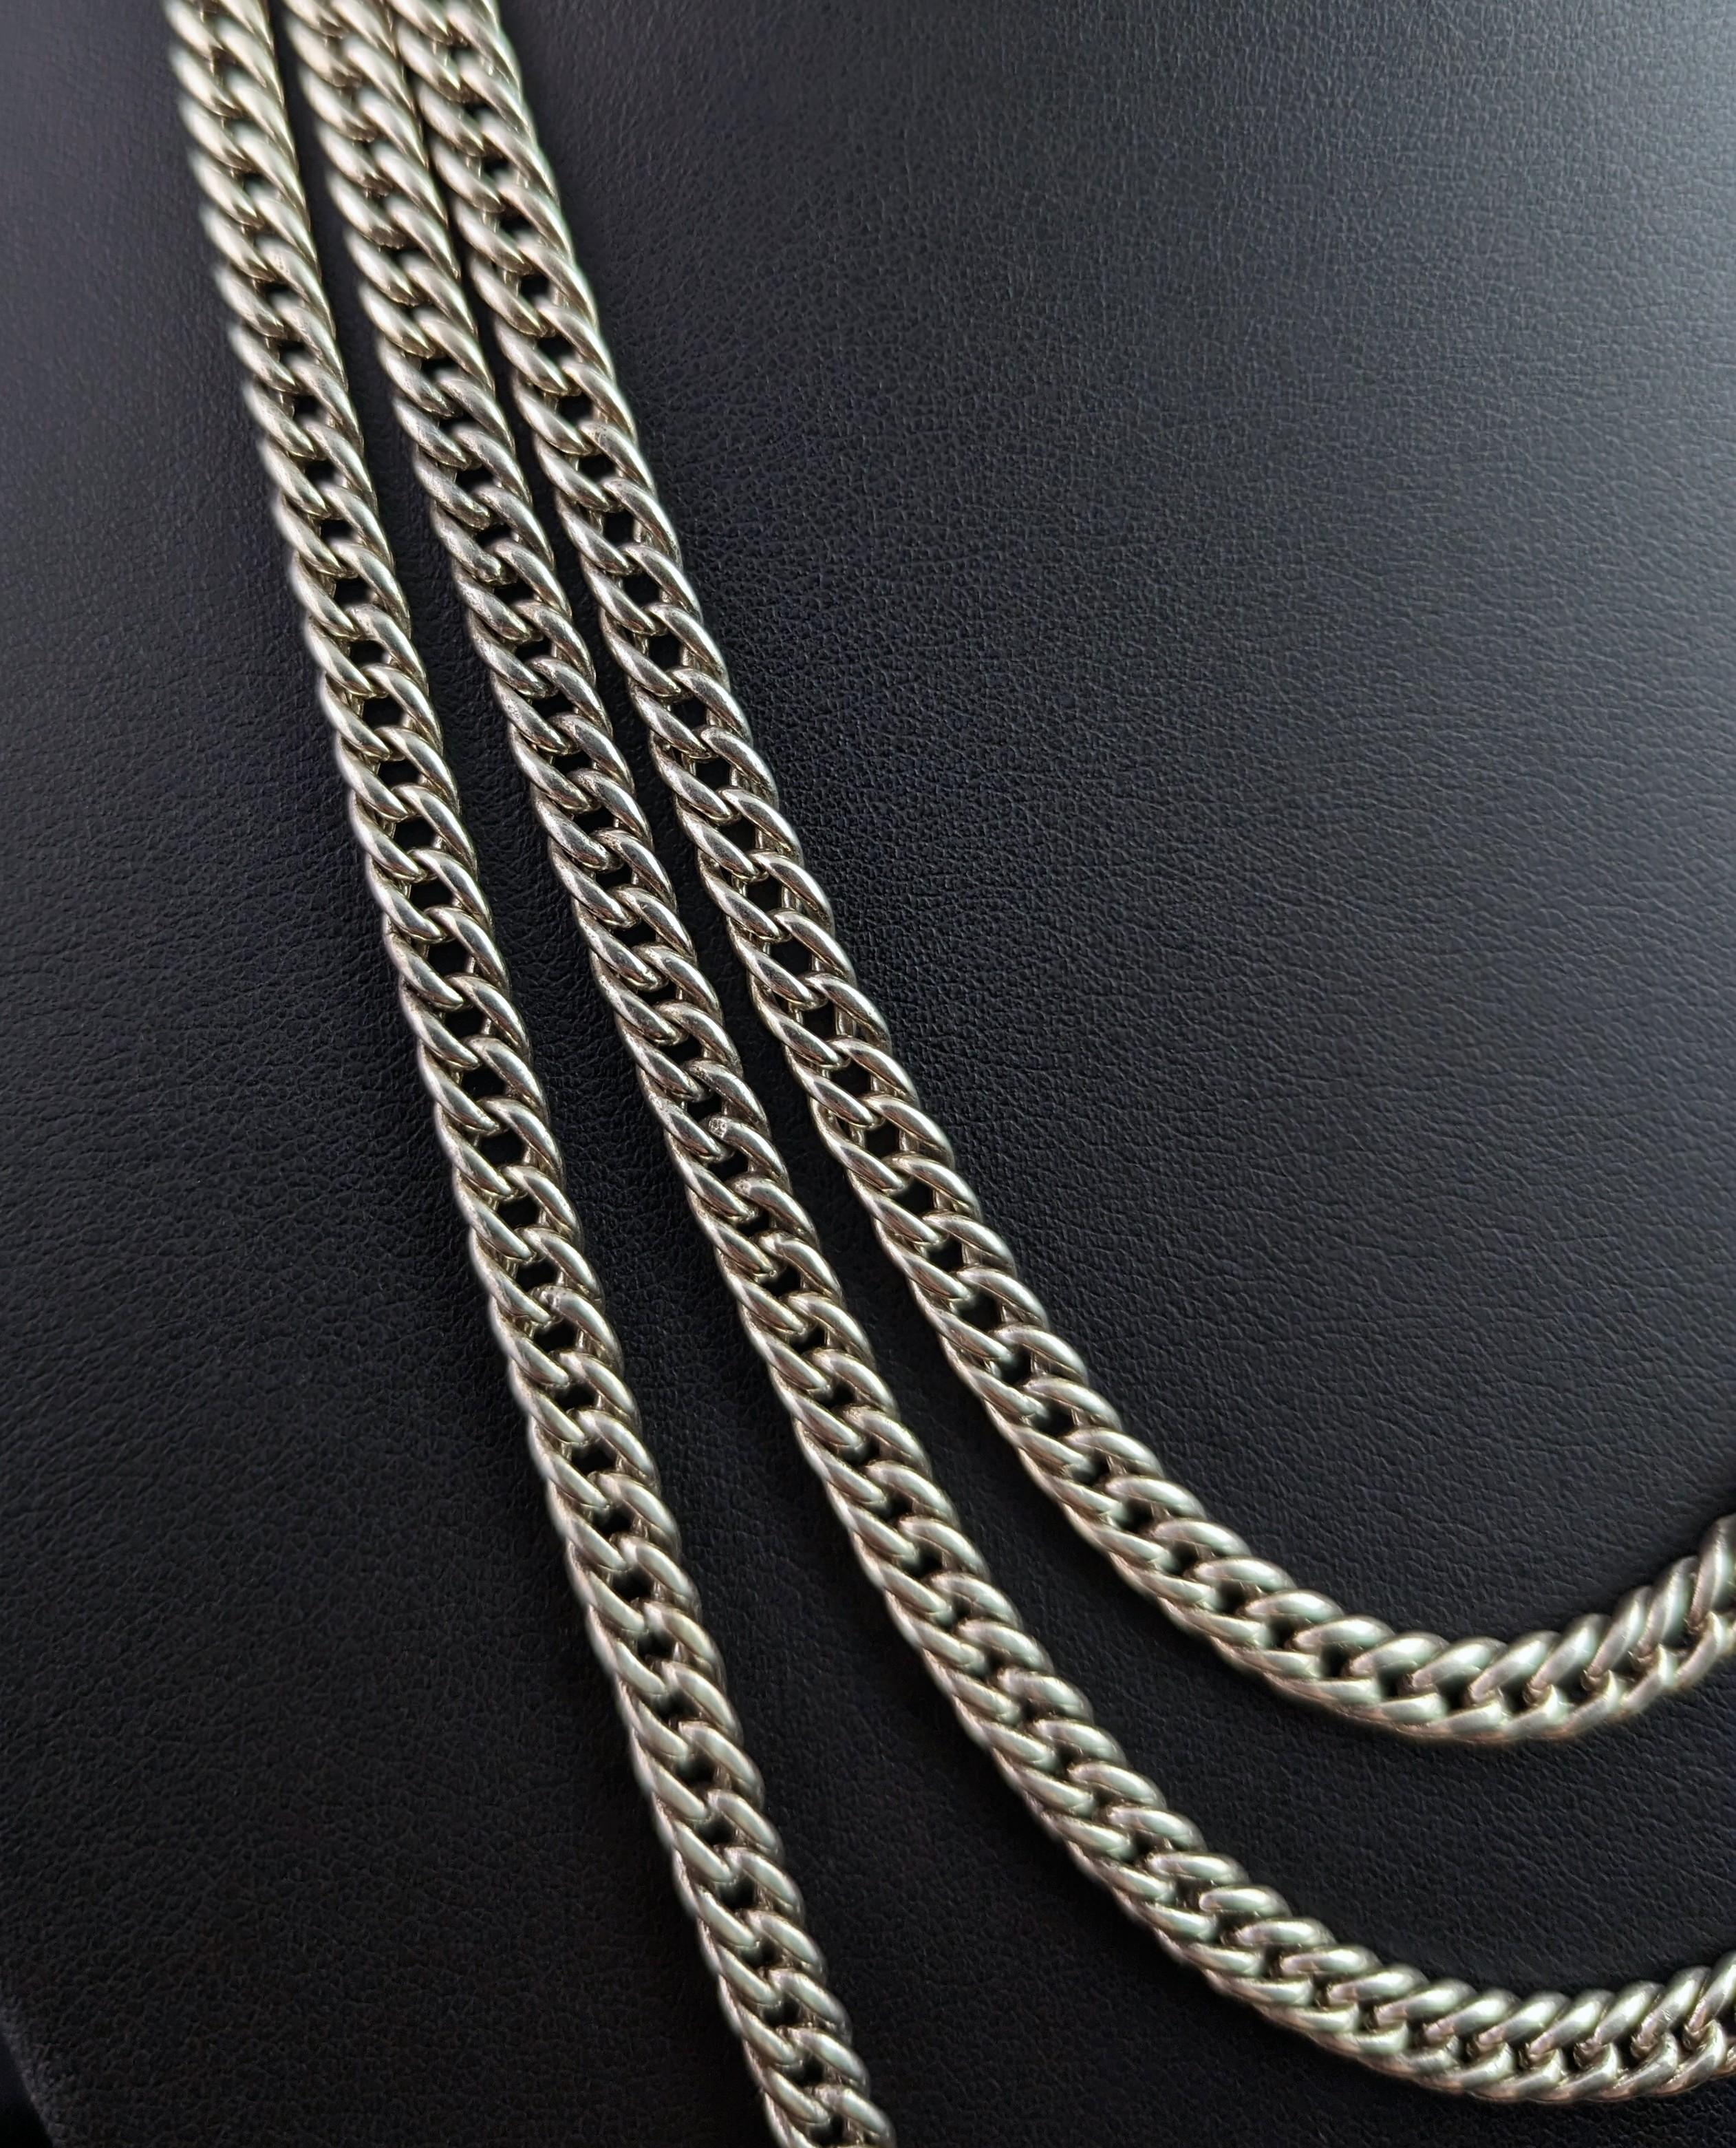 Antique French silver long chain necklace, longuard chain, 900 silver  11